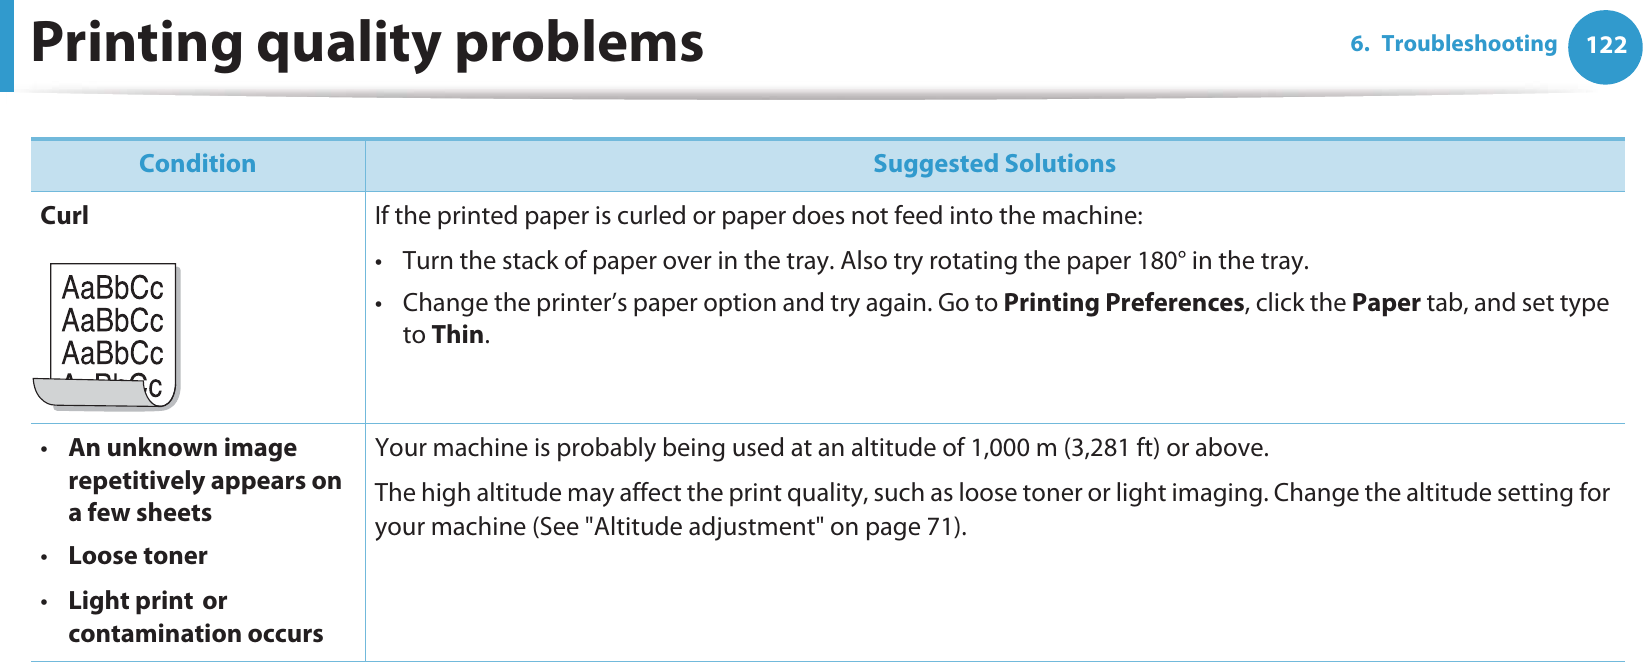 Printing quality problems 1226. Troubleshooting Curl If the printed paper is curled or paper does not feed into the machine:• Turn the stack of paper over in the tray. Also try rotating the paper 180° in the tray. • Change the printer’s paper option and try again. Go to Printing Preferences, click the Paper tab, and set type to Thin.•An unknown image repetitively appears on a few sheets•Loose toner•Light printGor contamination occursYour machine is probably being used at an altitude of 1,000 m (3,281 ft) or above.The high altitude may affect the print quality, such as loose toner or light imaging. Change the altitude setting for your machine (See &quot;Altitude adjustment&quot; on page 71).Condition Suggested Solutions